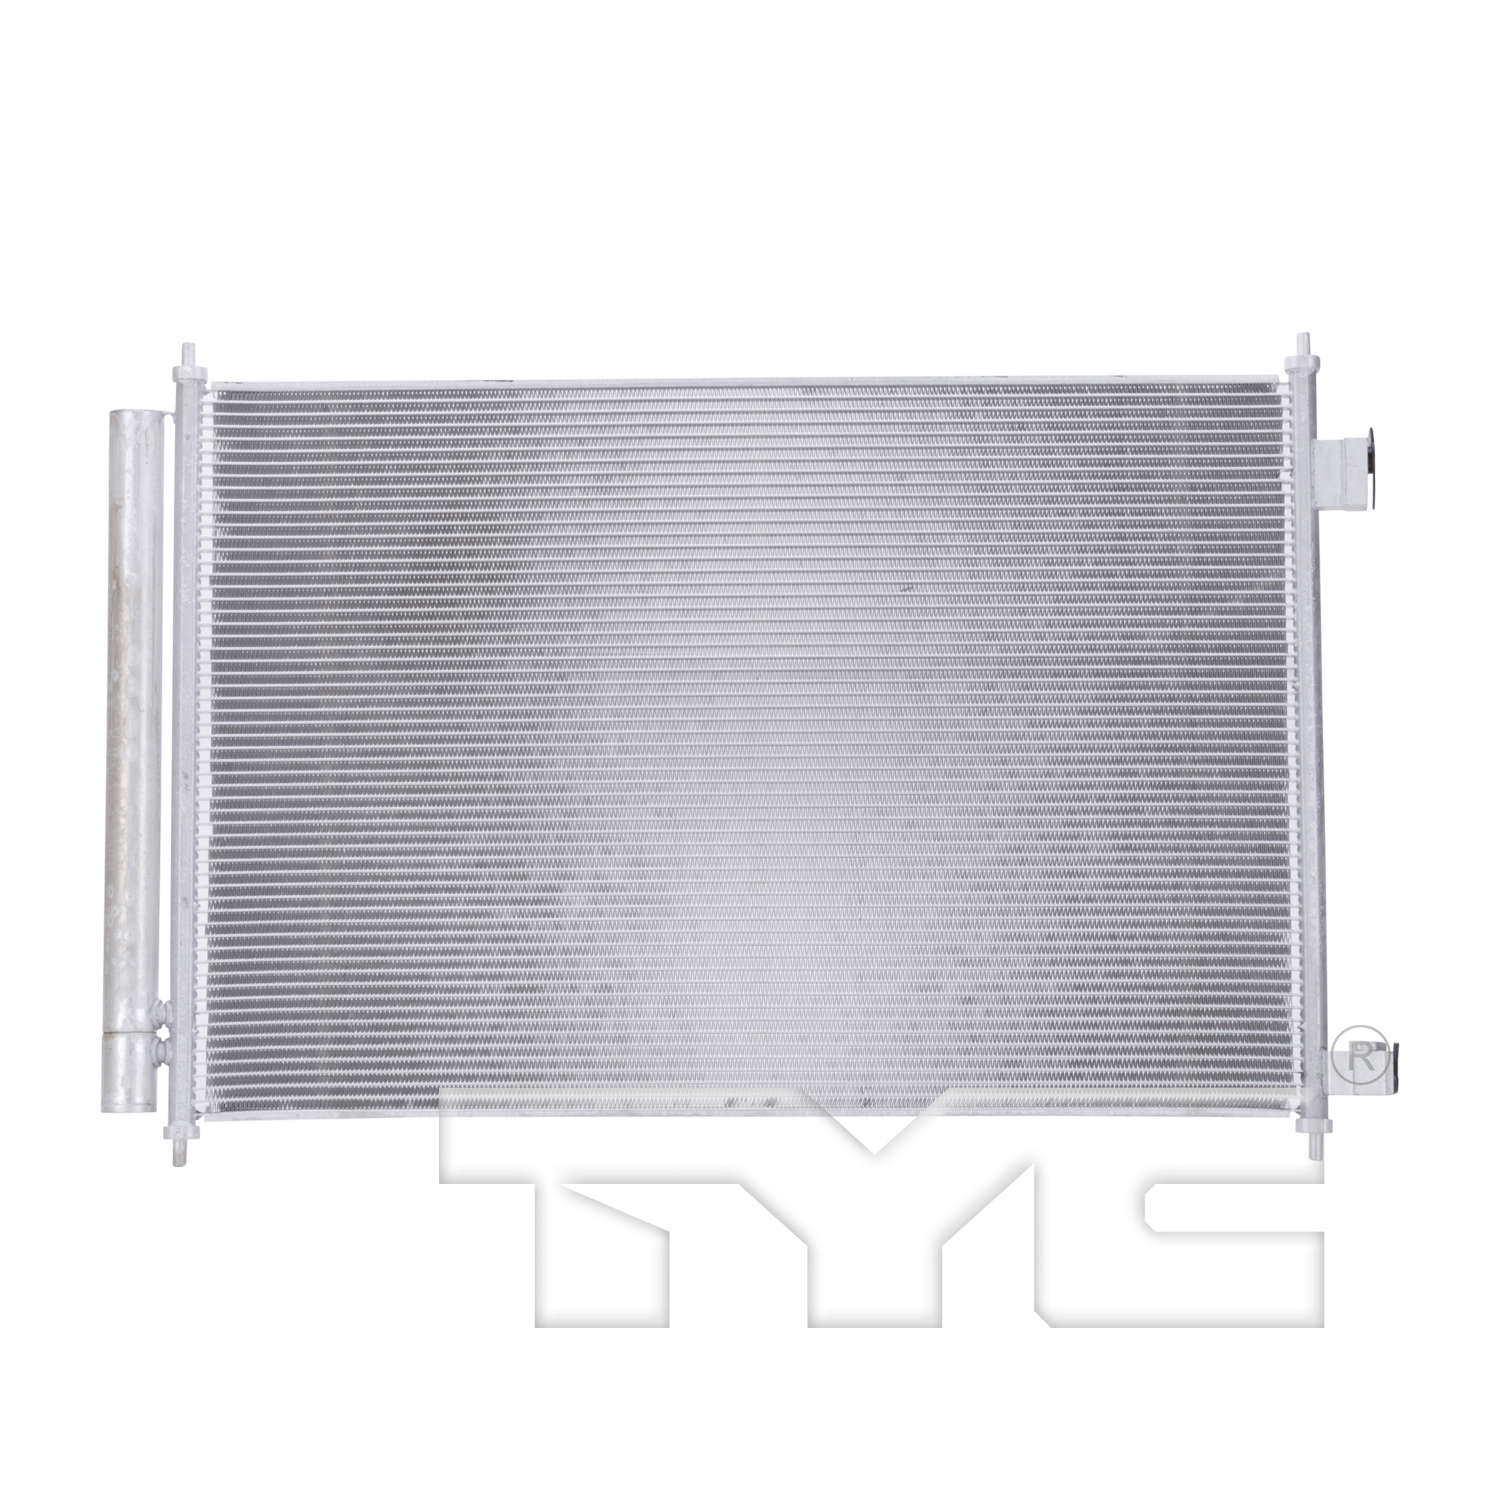 Aftermarket AC CONDENSERS for NISSAN - NV200, NV200,13-21,Air conditioning condenser